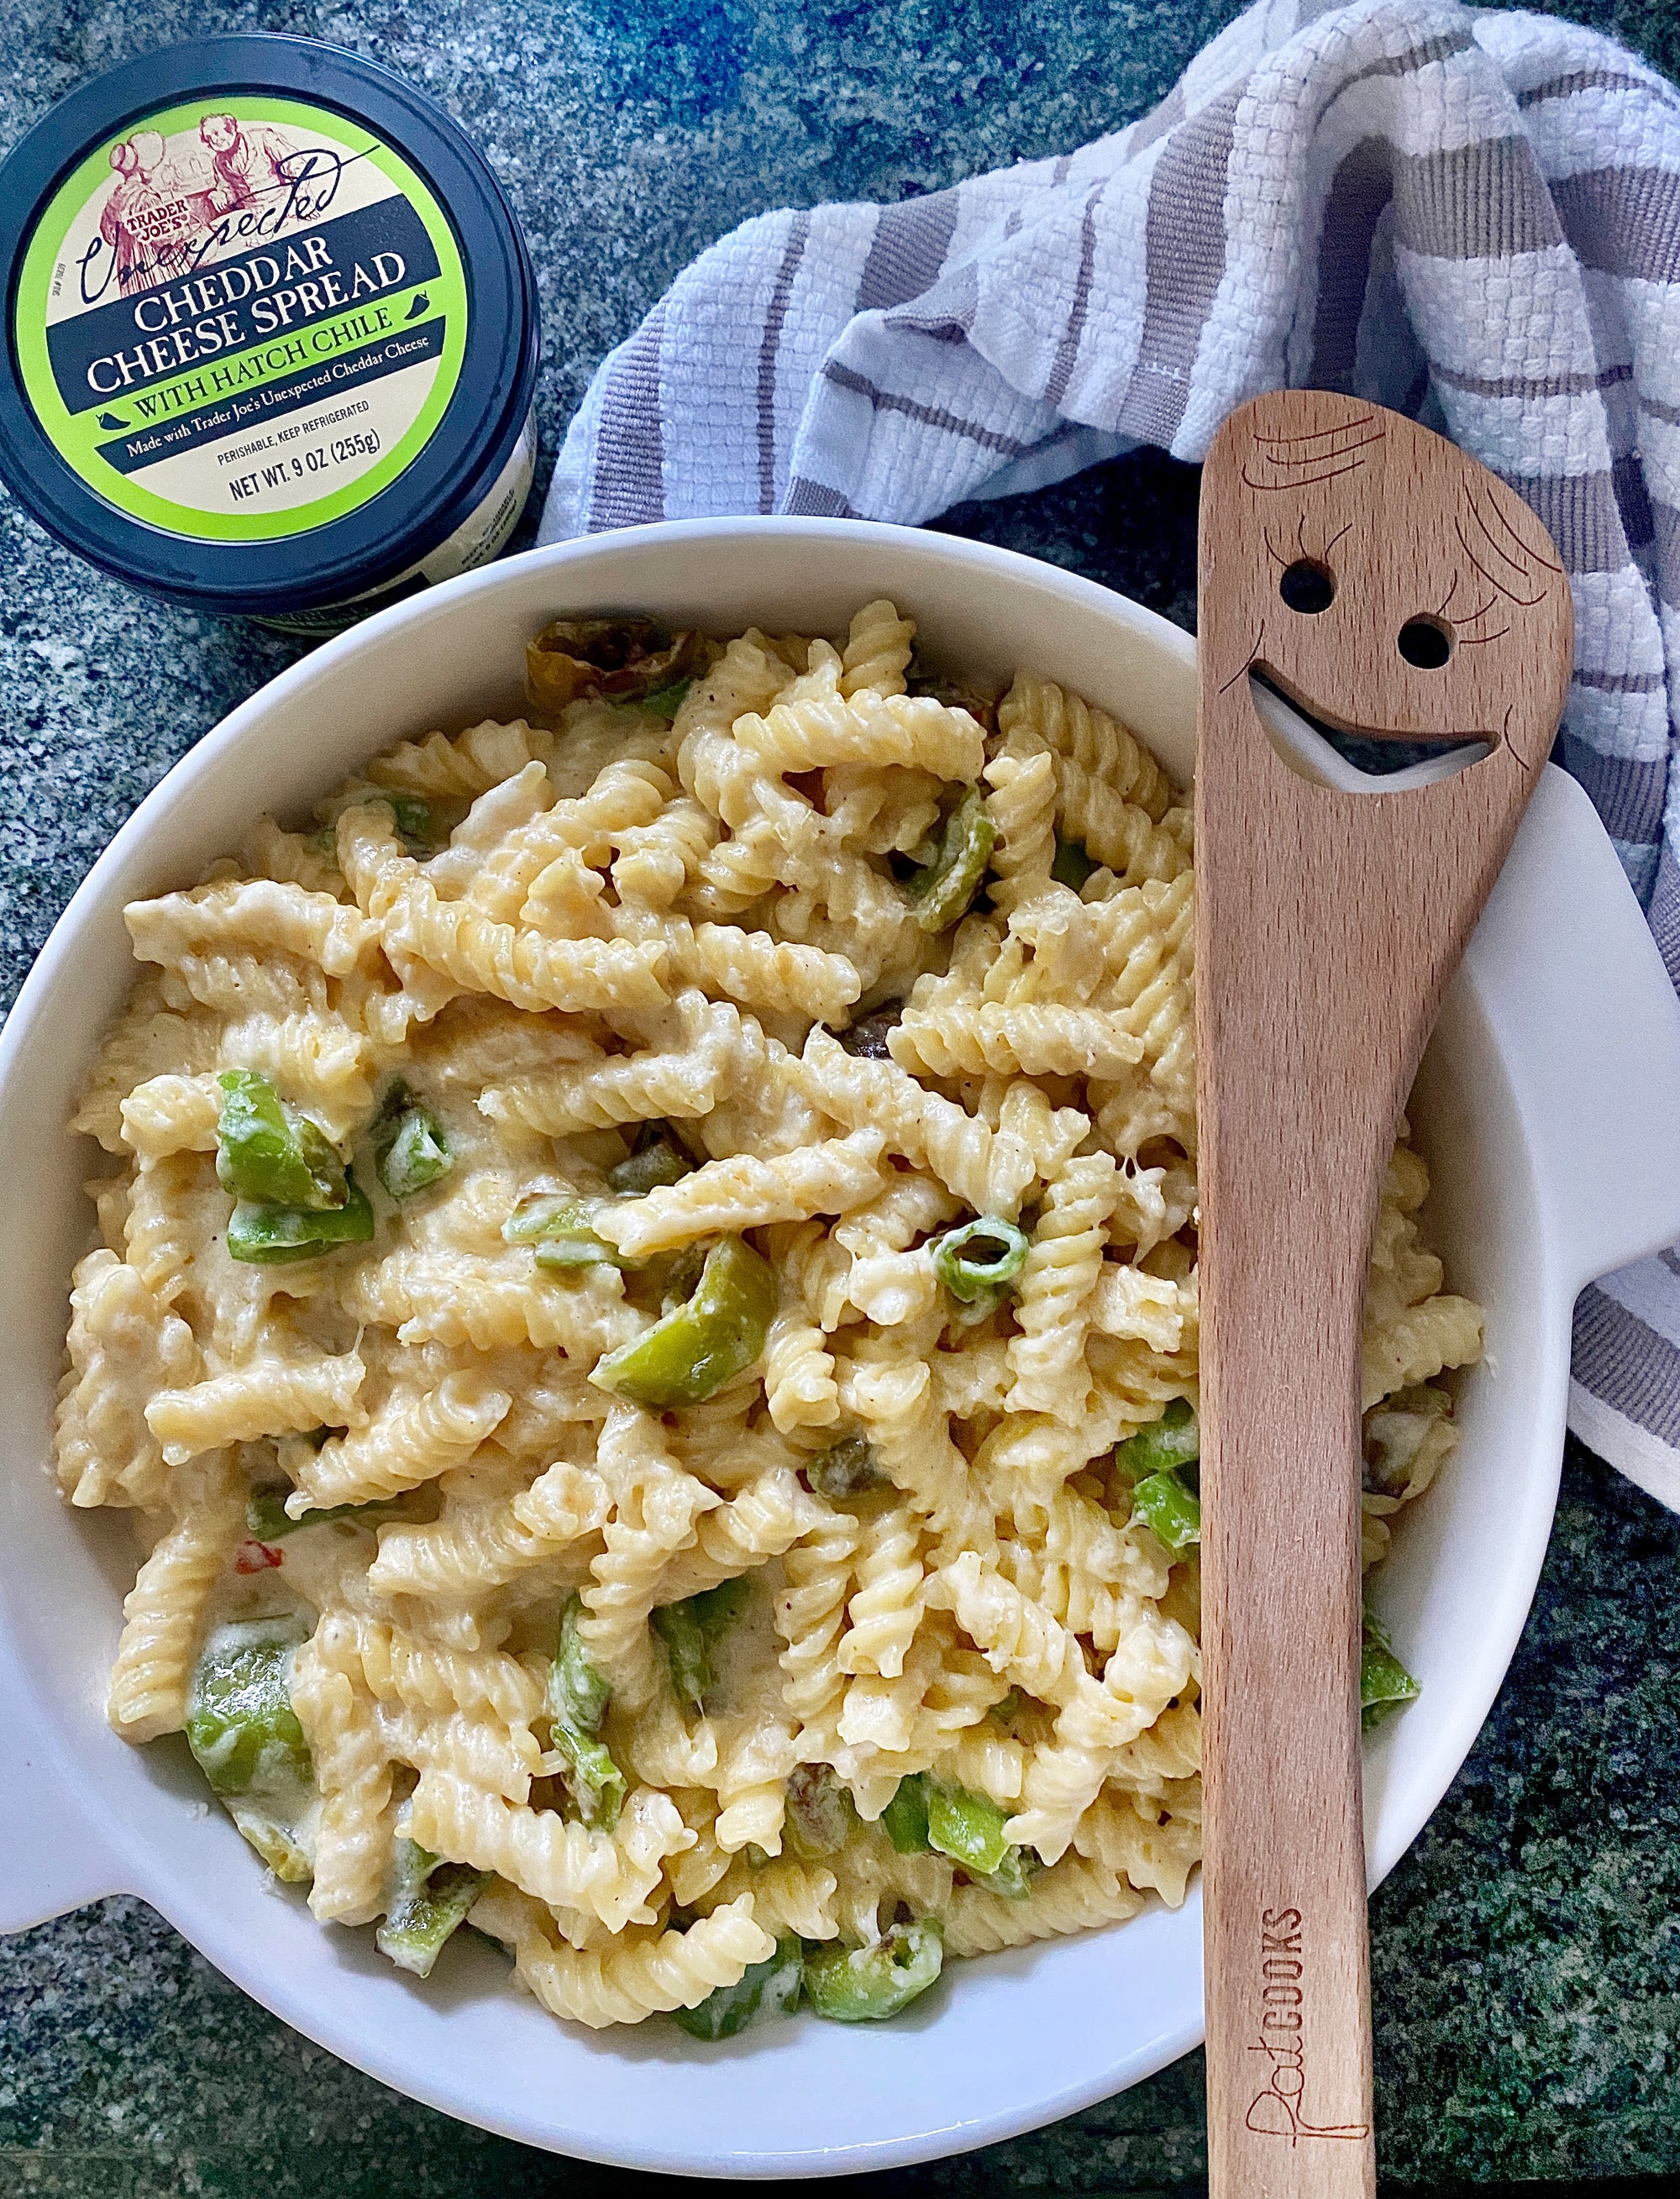 Unexpected Cheddar Hatch Chile Mac & Cheese